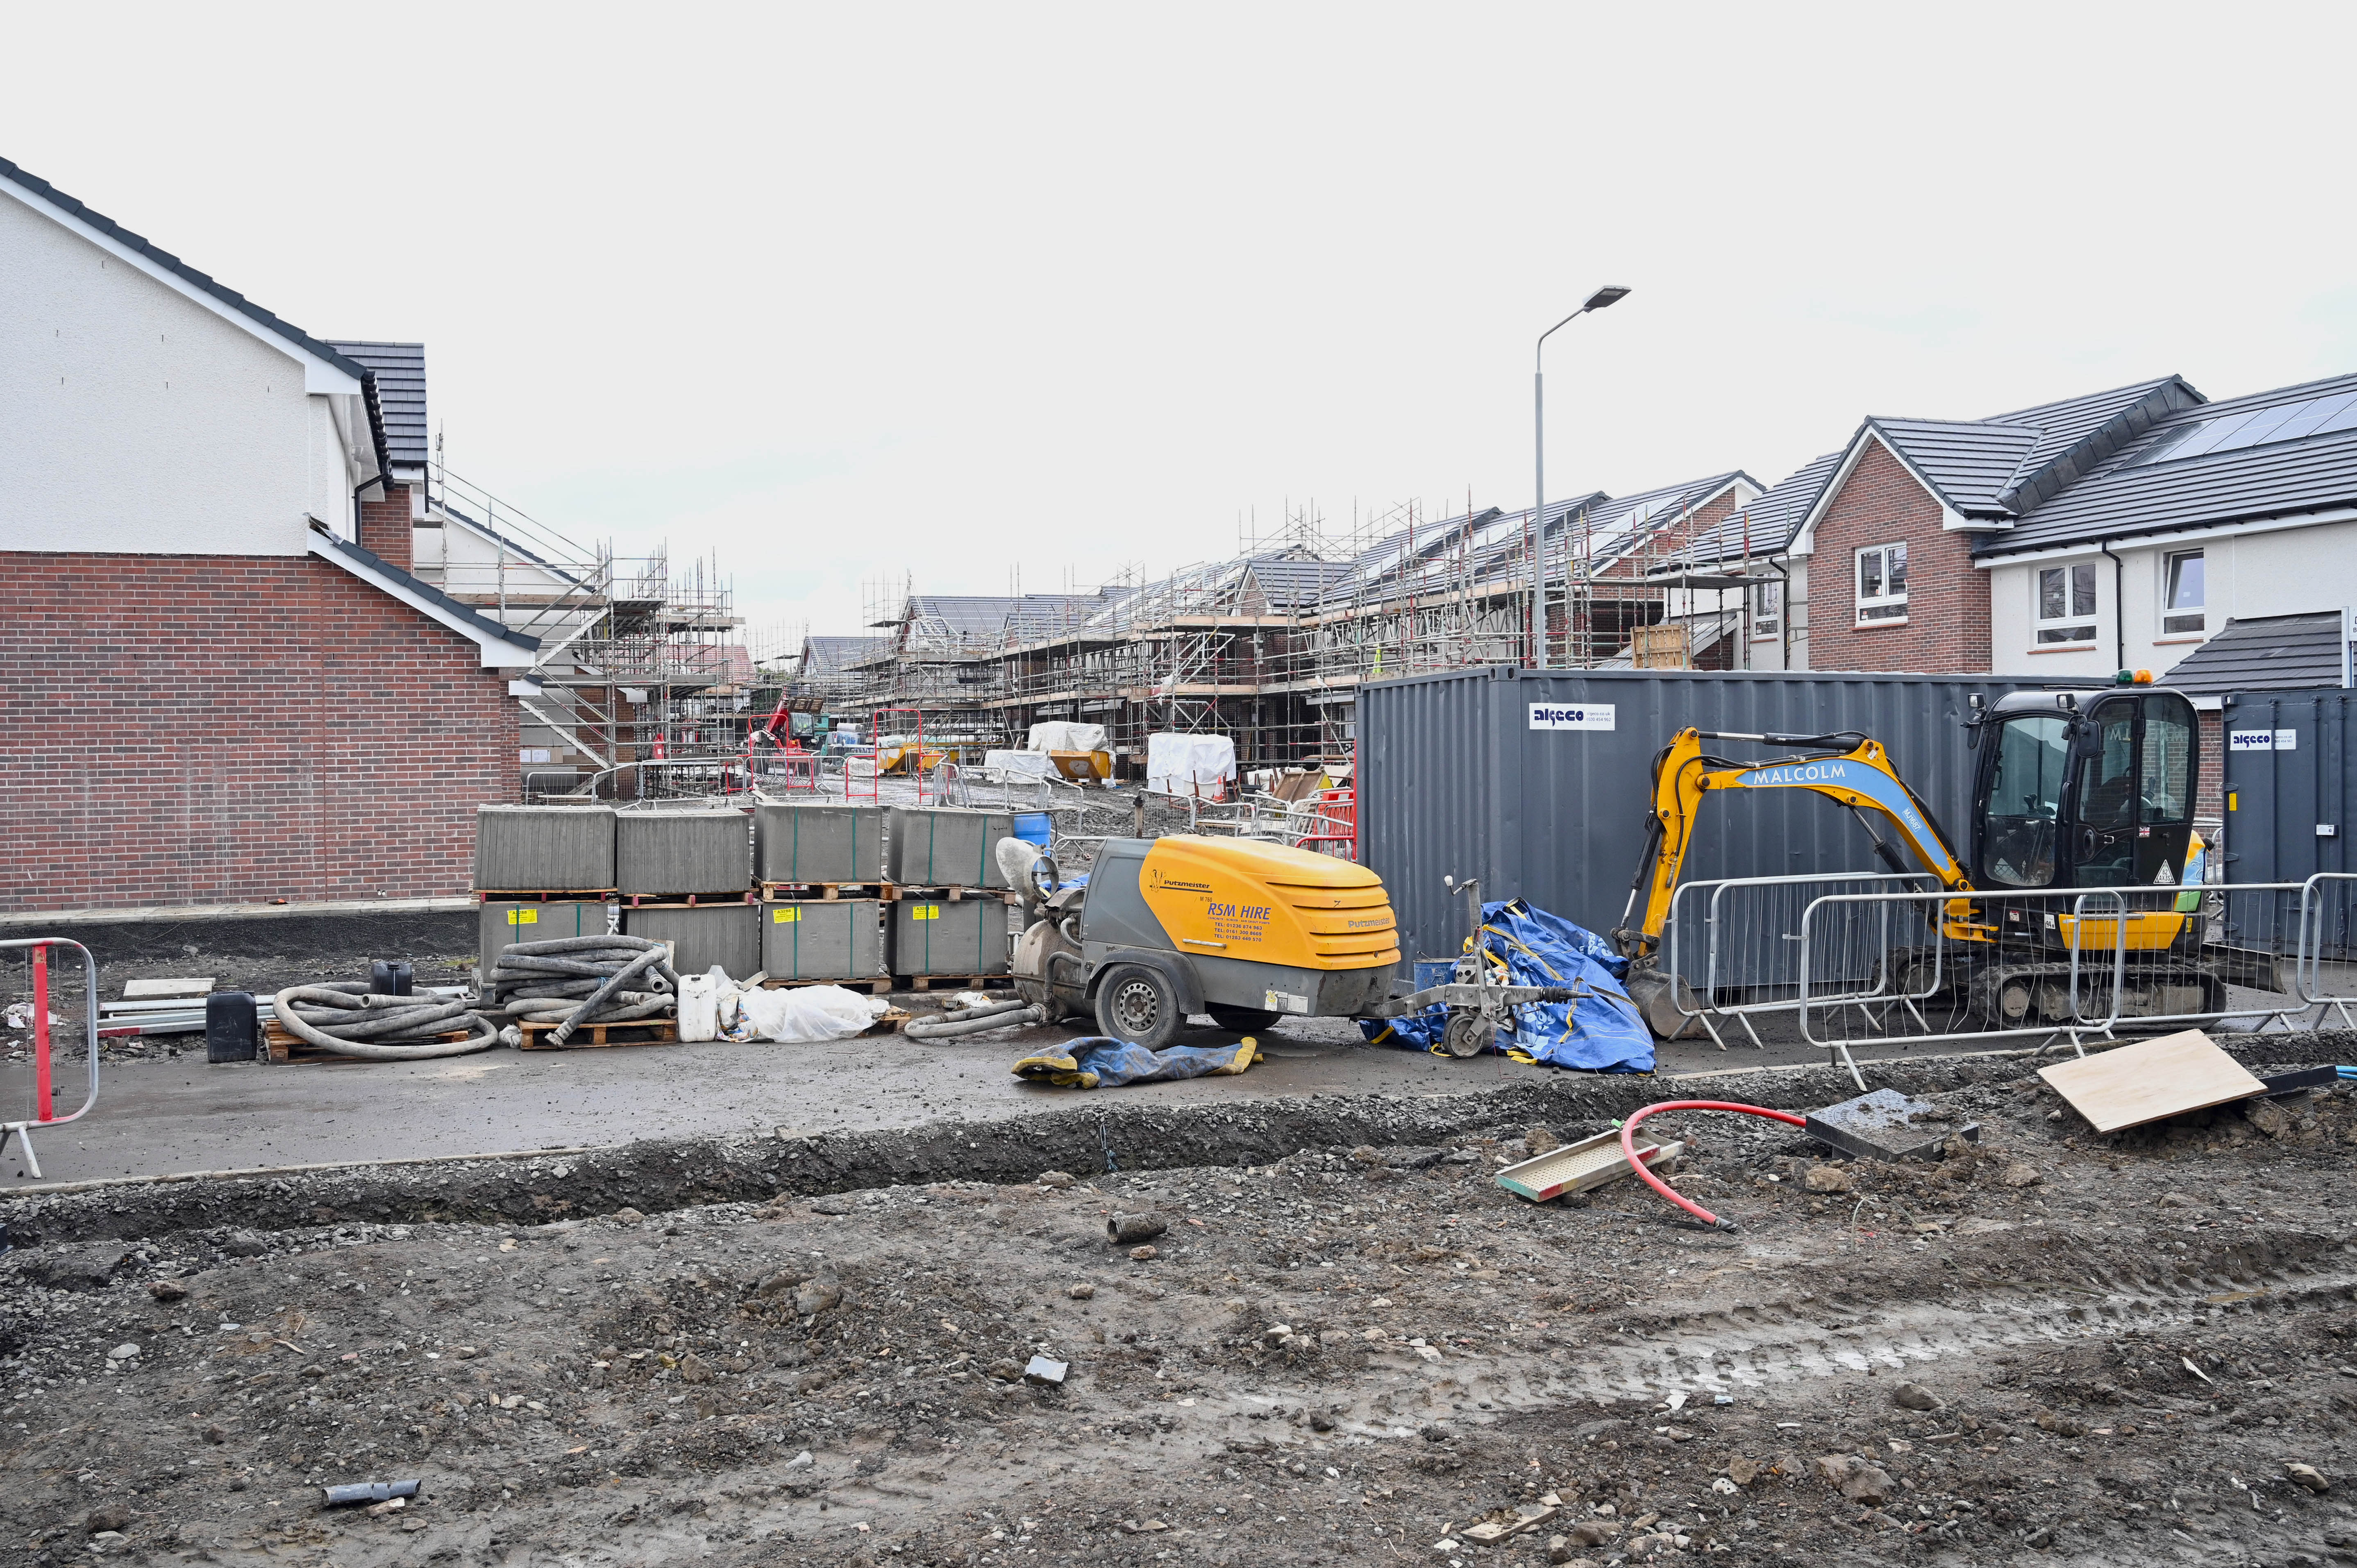 Sites agreed for new North Lanarkshire Council homes